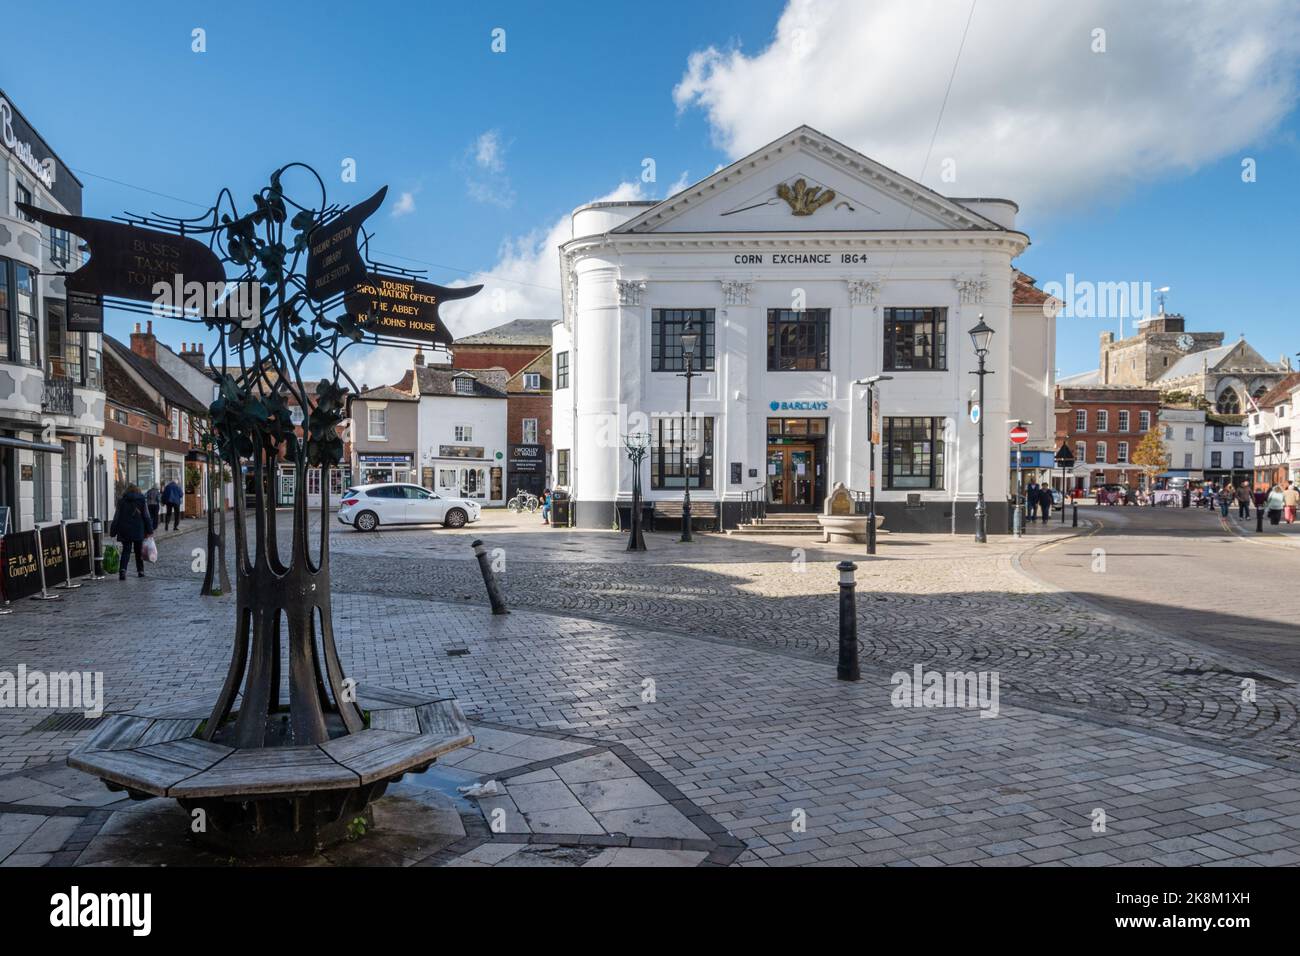 The old Corn Exchange in Romsey town centre, Hampshire, England, UK, a Grade II* listed historic building Stock Photo